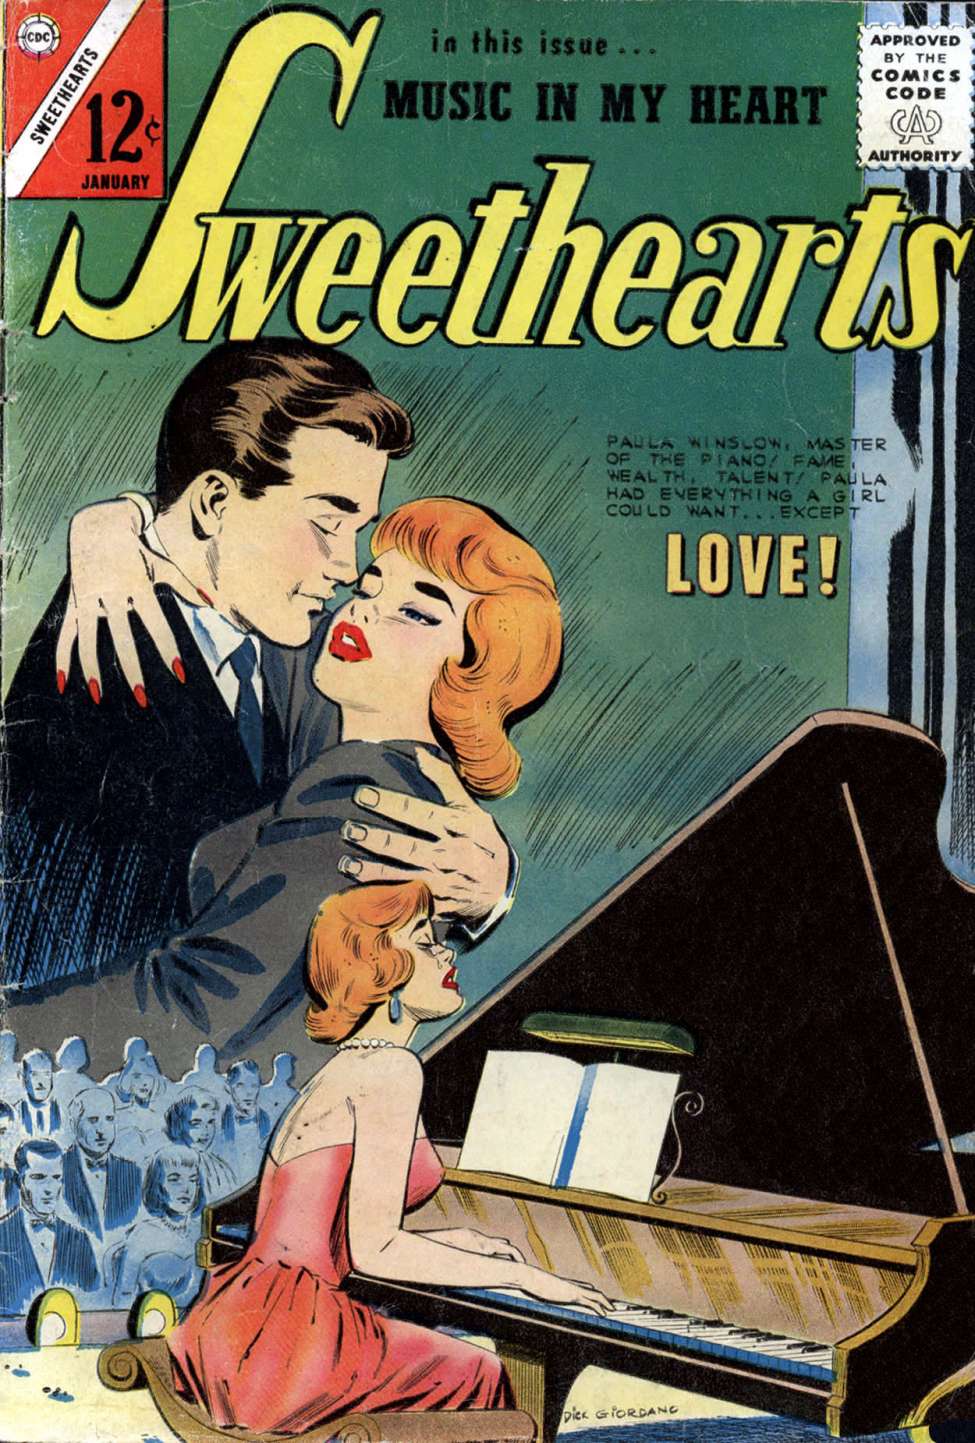 Book Cover For Sweethearts 69